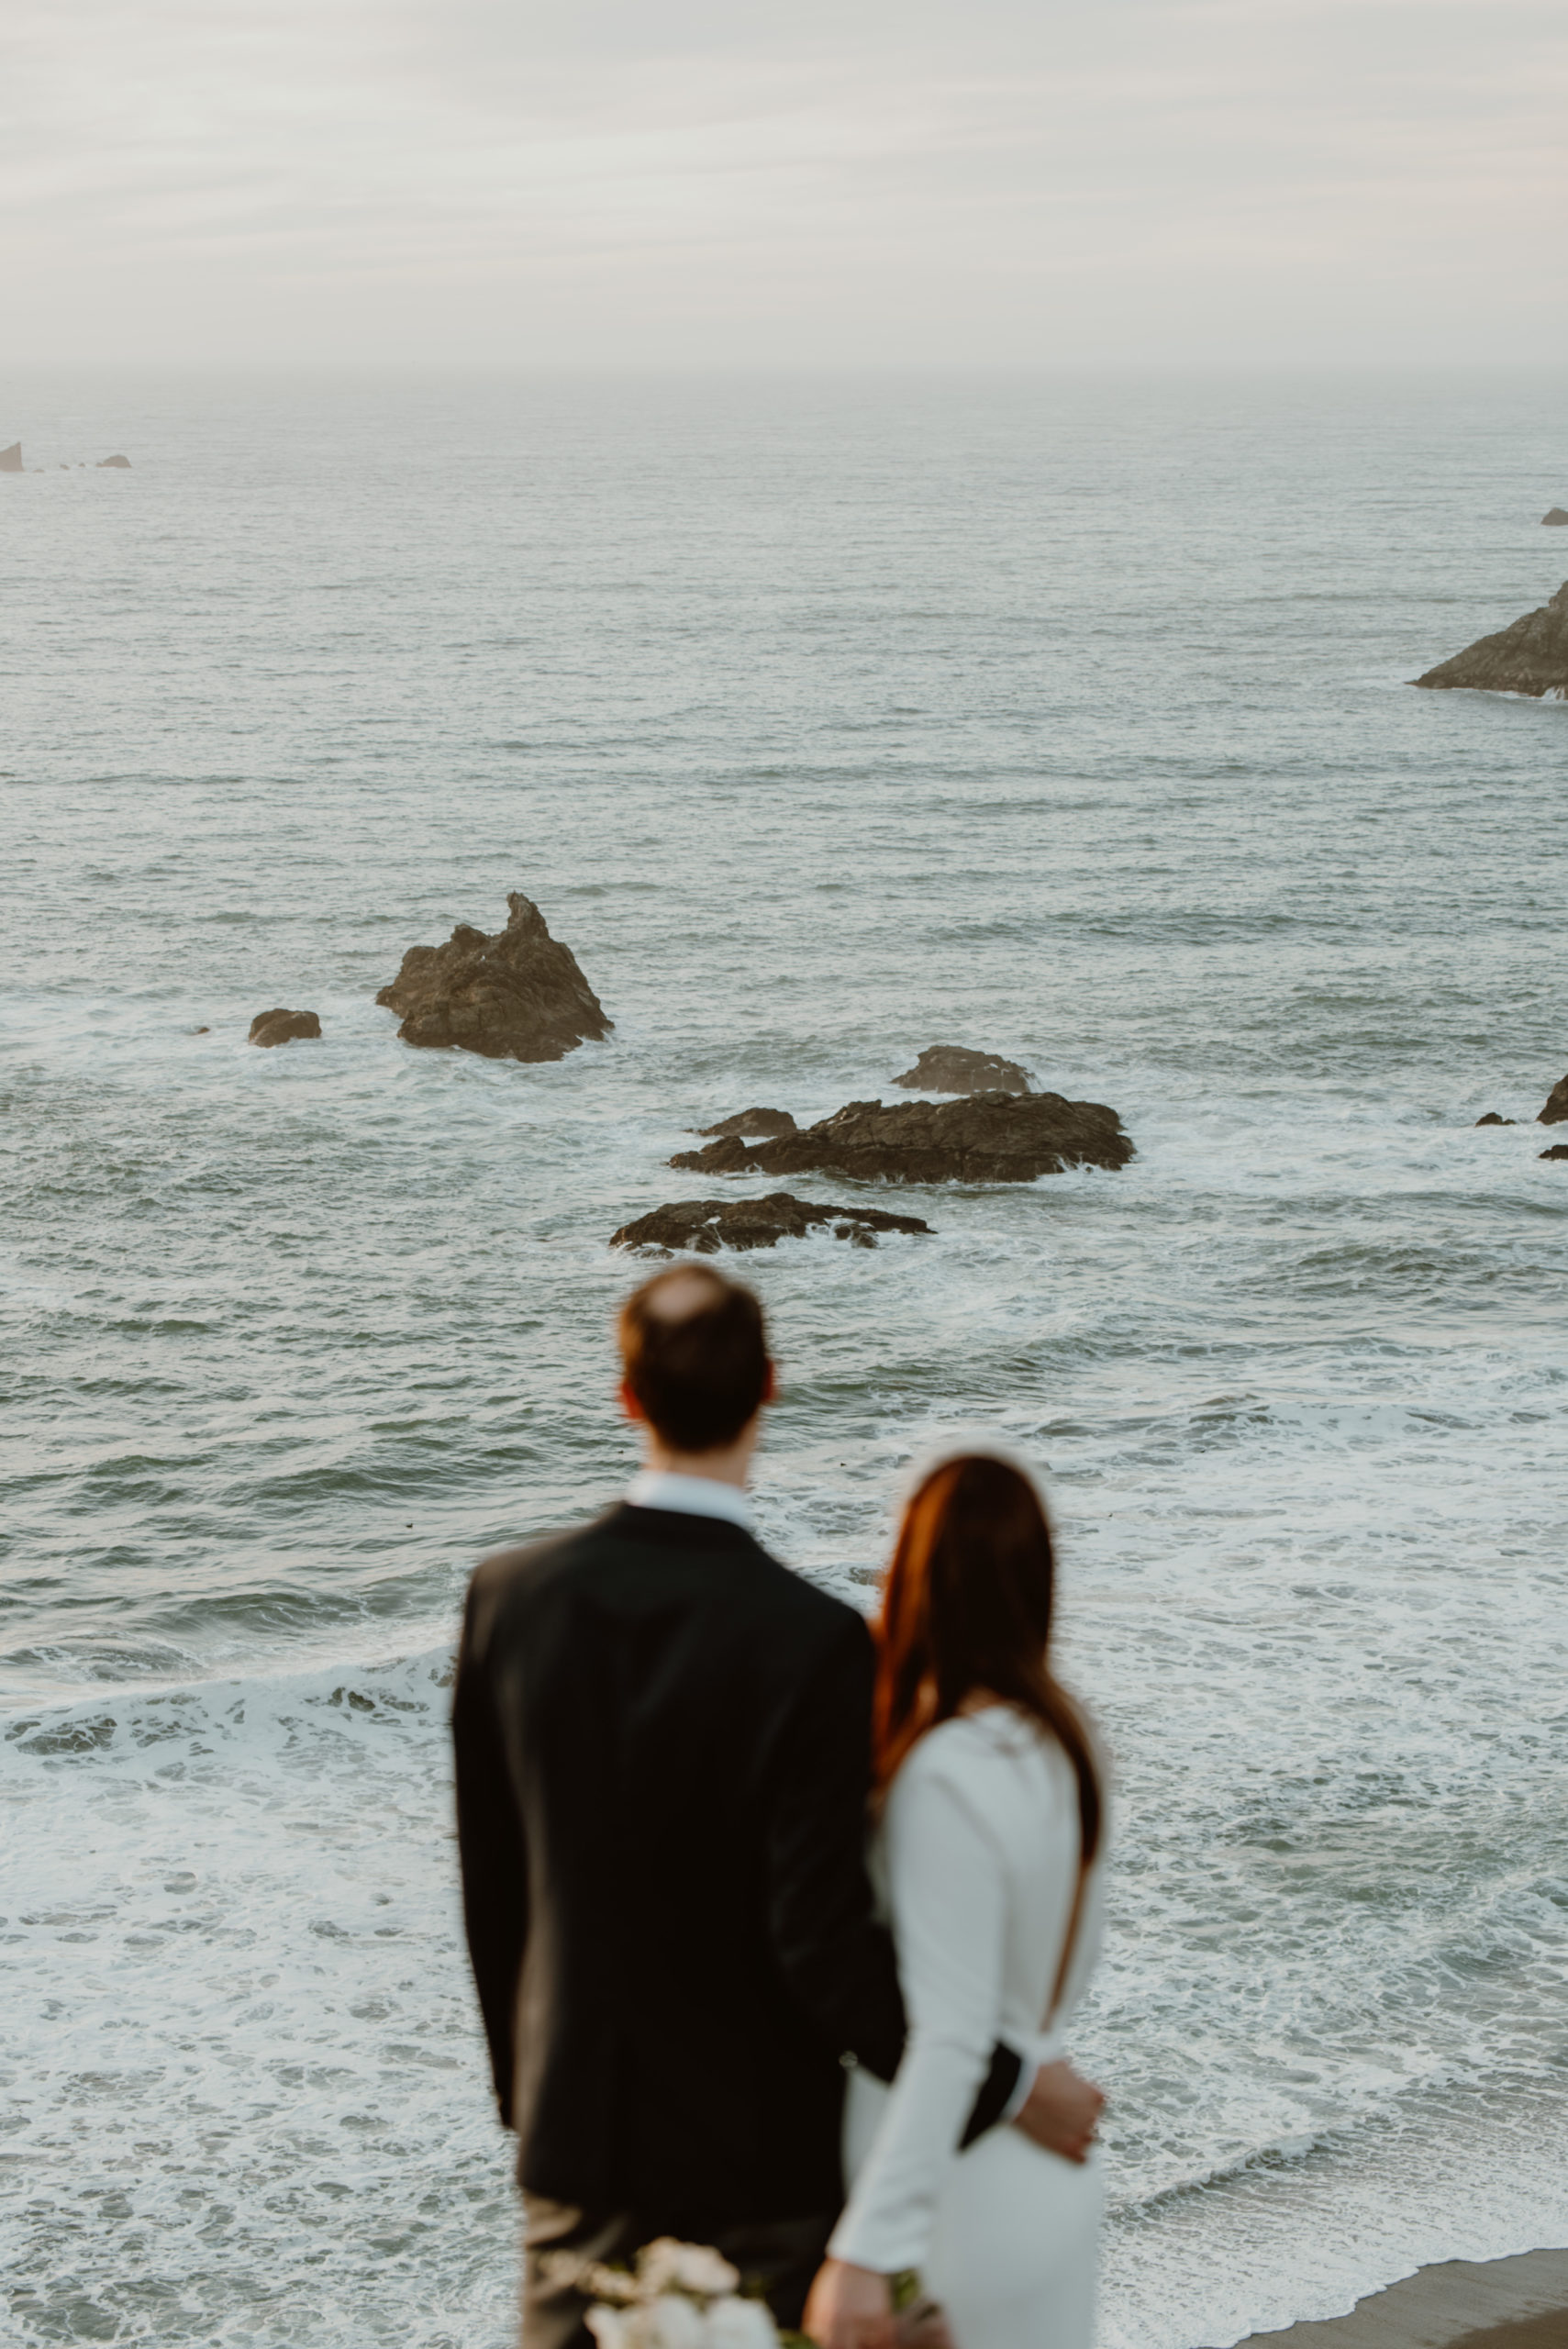 "You're being so selfish!" The words none of us want to hear about our wedding days. But are elopements actually selfish? Click to find out!

A bride and groom stand arm-in-arm on top pf a cliff overlooking the Pacific Ocean in California on their elopement day.